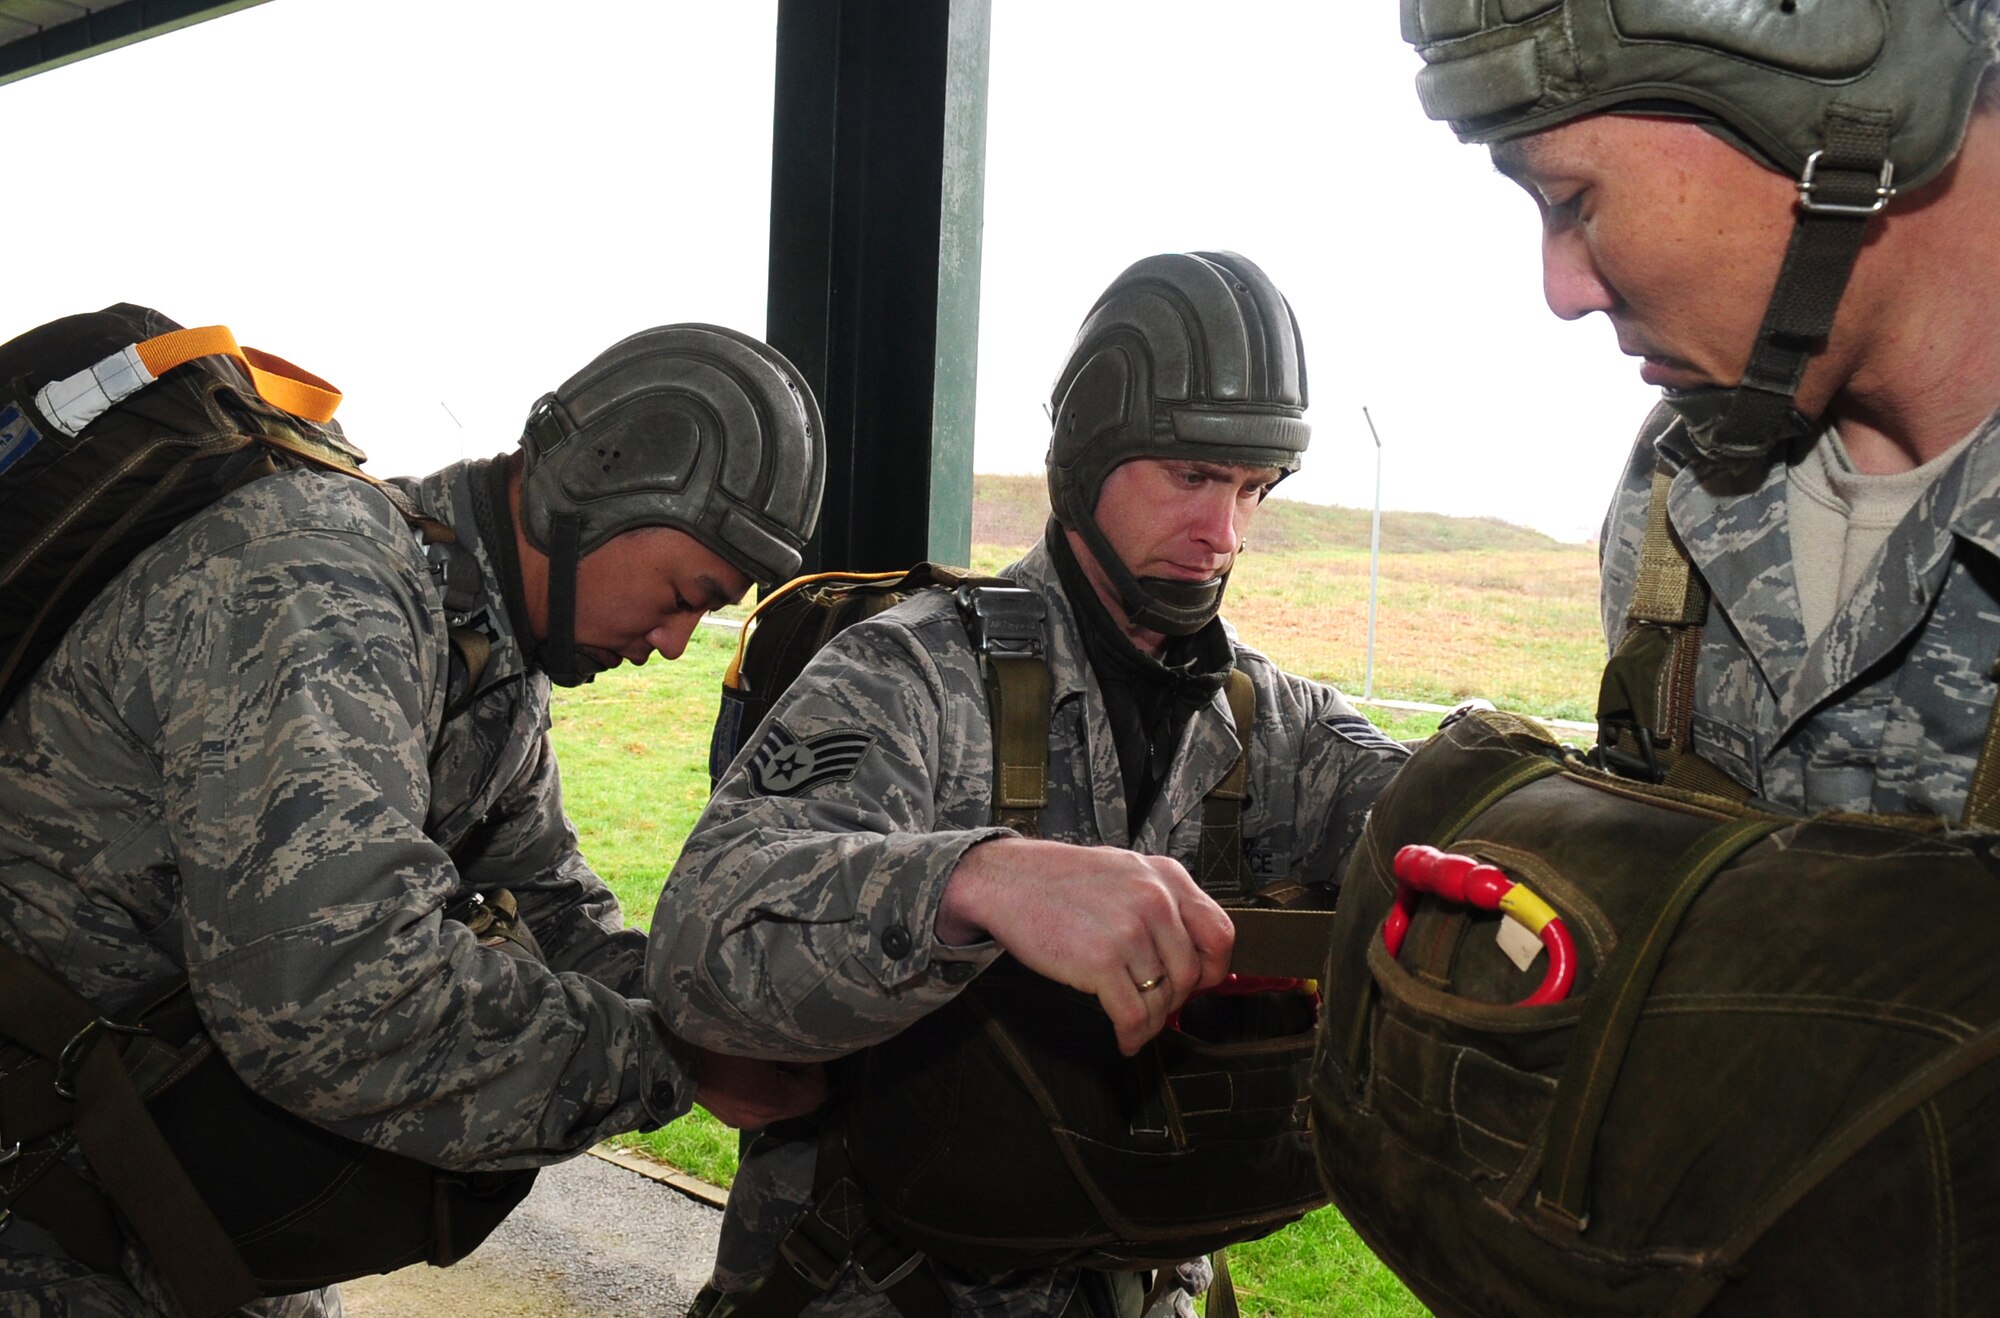 U.S. Air Force Captain Walter Gray, Staff Sgt. Ronald Booth, and Tech. Sgt. Randal Komaki, check  on each other?s  equipment while donning French parachutes before a multinational jump with French paratroopers , March 4, 2010.  Members of the 435th Contingency Response Group and the 5th Quartermaster Company joined with their French military counterparts for a week of training at the École des troupes aéroportées (ETAP), or School of Airborne Troops, a military school dedicated to training the military paratroopers   of the French army, located in the town of Pau, in the département  of Pyrénées-Atlantiques , France.  The ETAP is responsible for training paratroopers, and for international cooperation and promotion of paratroop culture. (U.S. Air Force Photo by Staff Sgt. Jocelyn Rich)